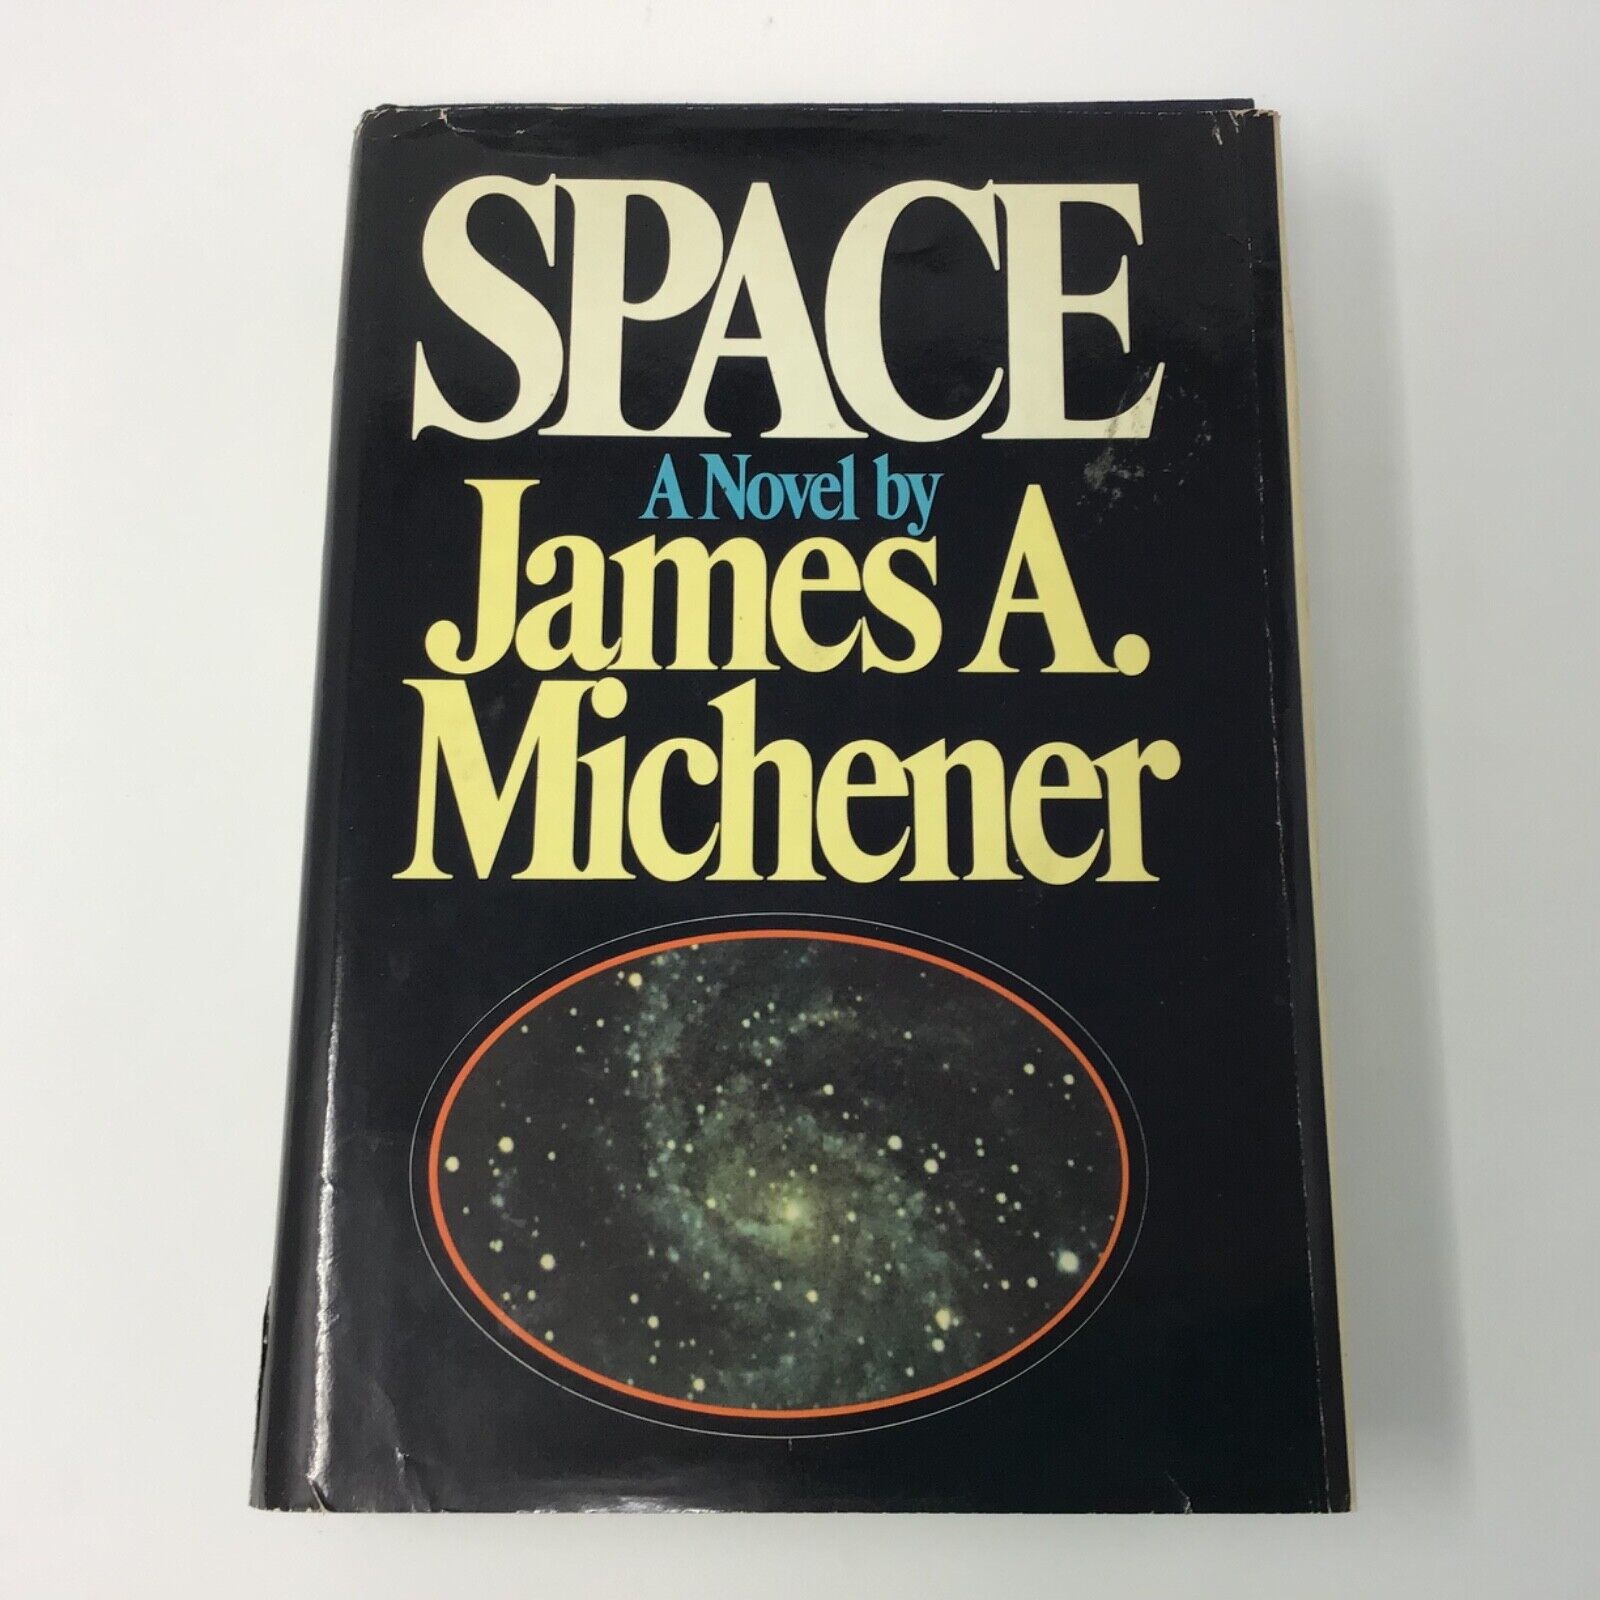 SPACE a Nobel by James A. Michener -1st edition 1982